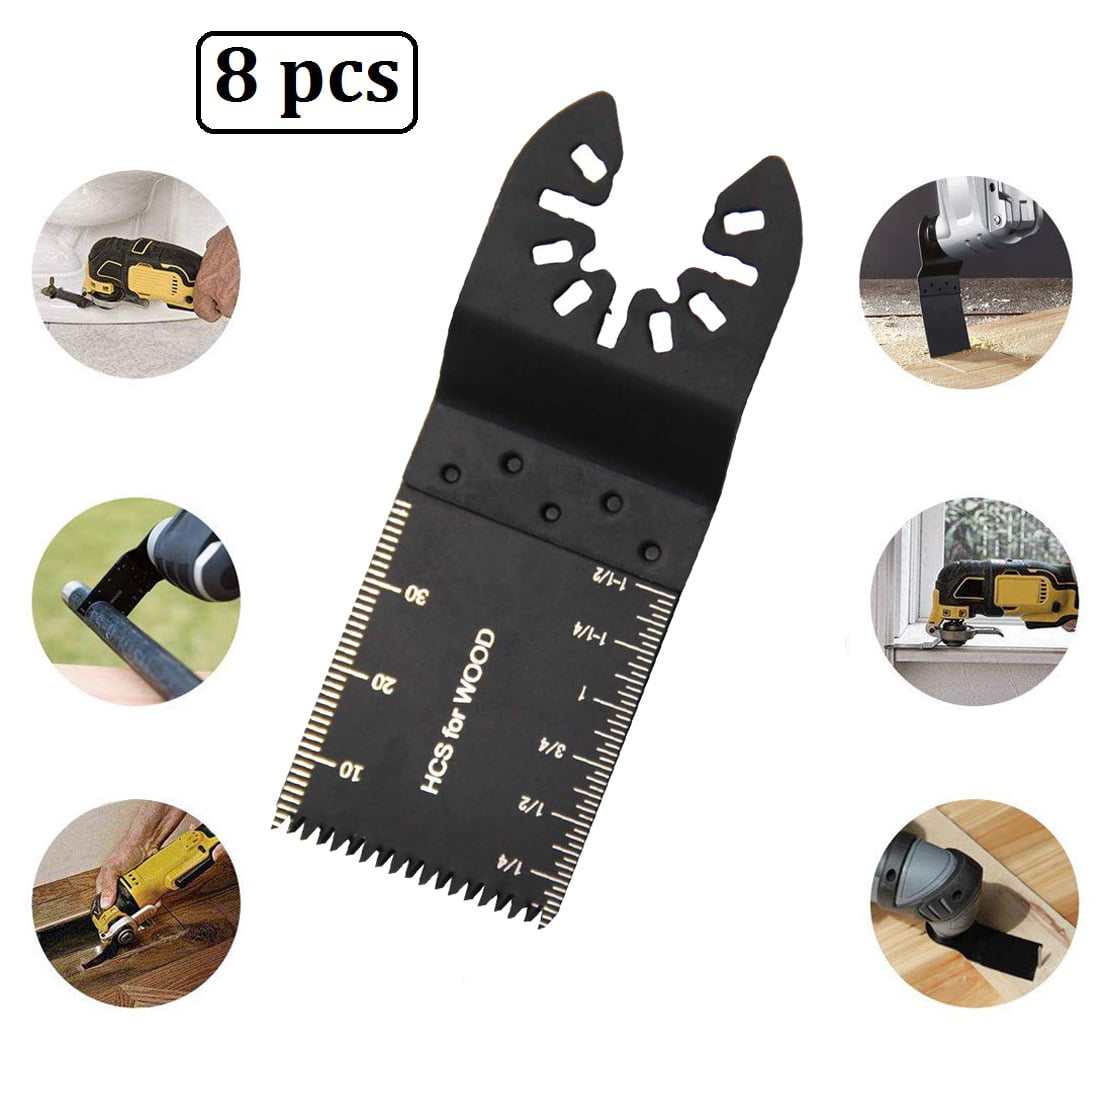 Details about   34mm oscillating Multi tool cut saw blades Carbon Steel Cutter DIY universal 1PC 